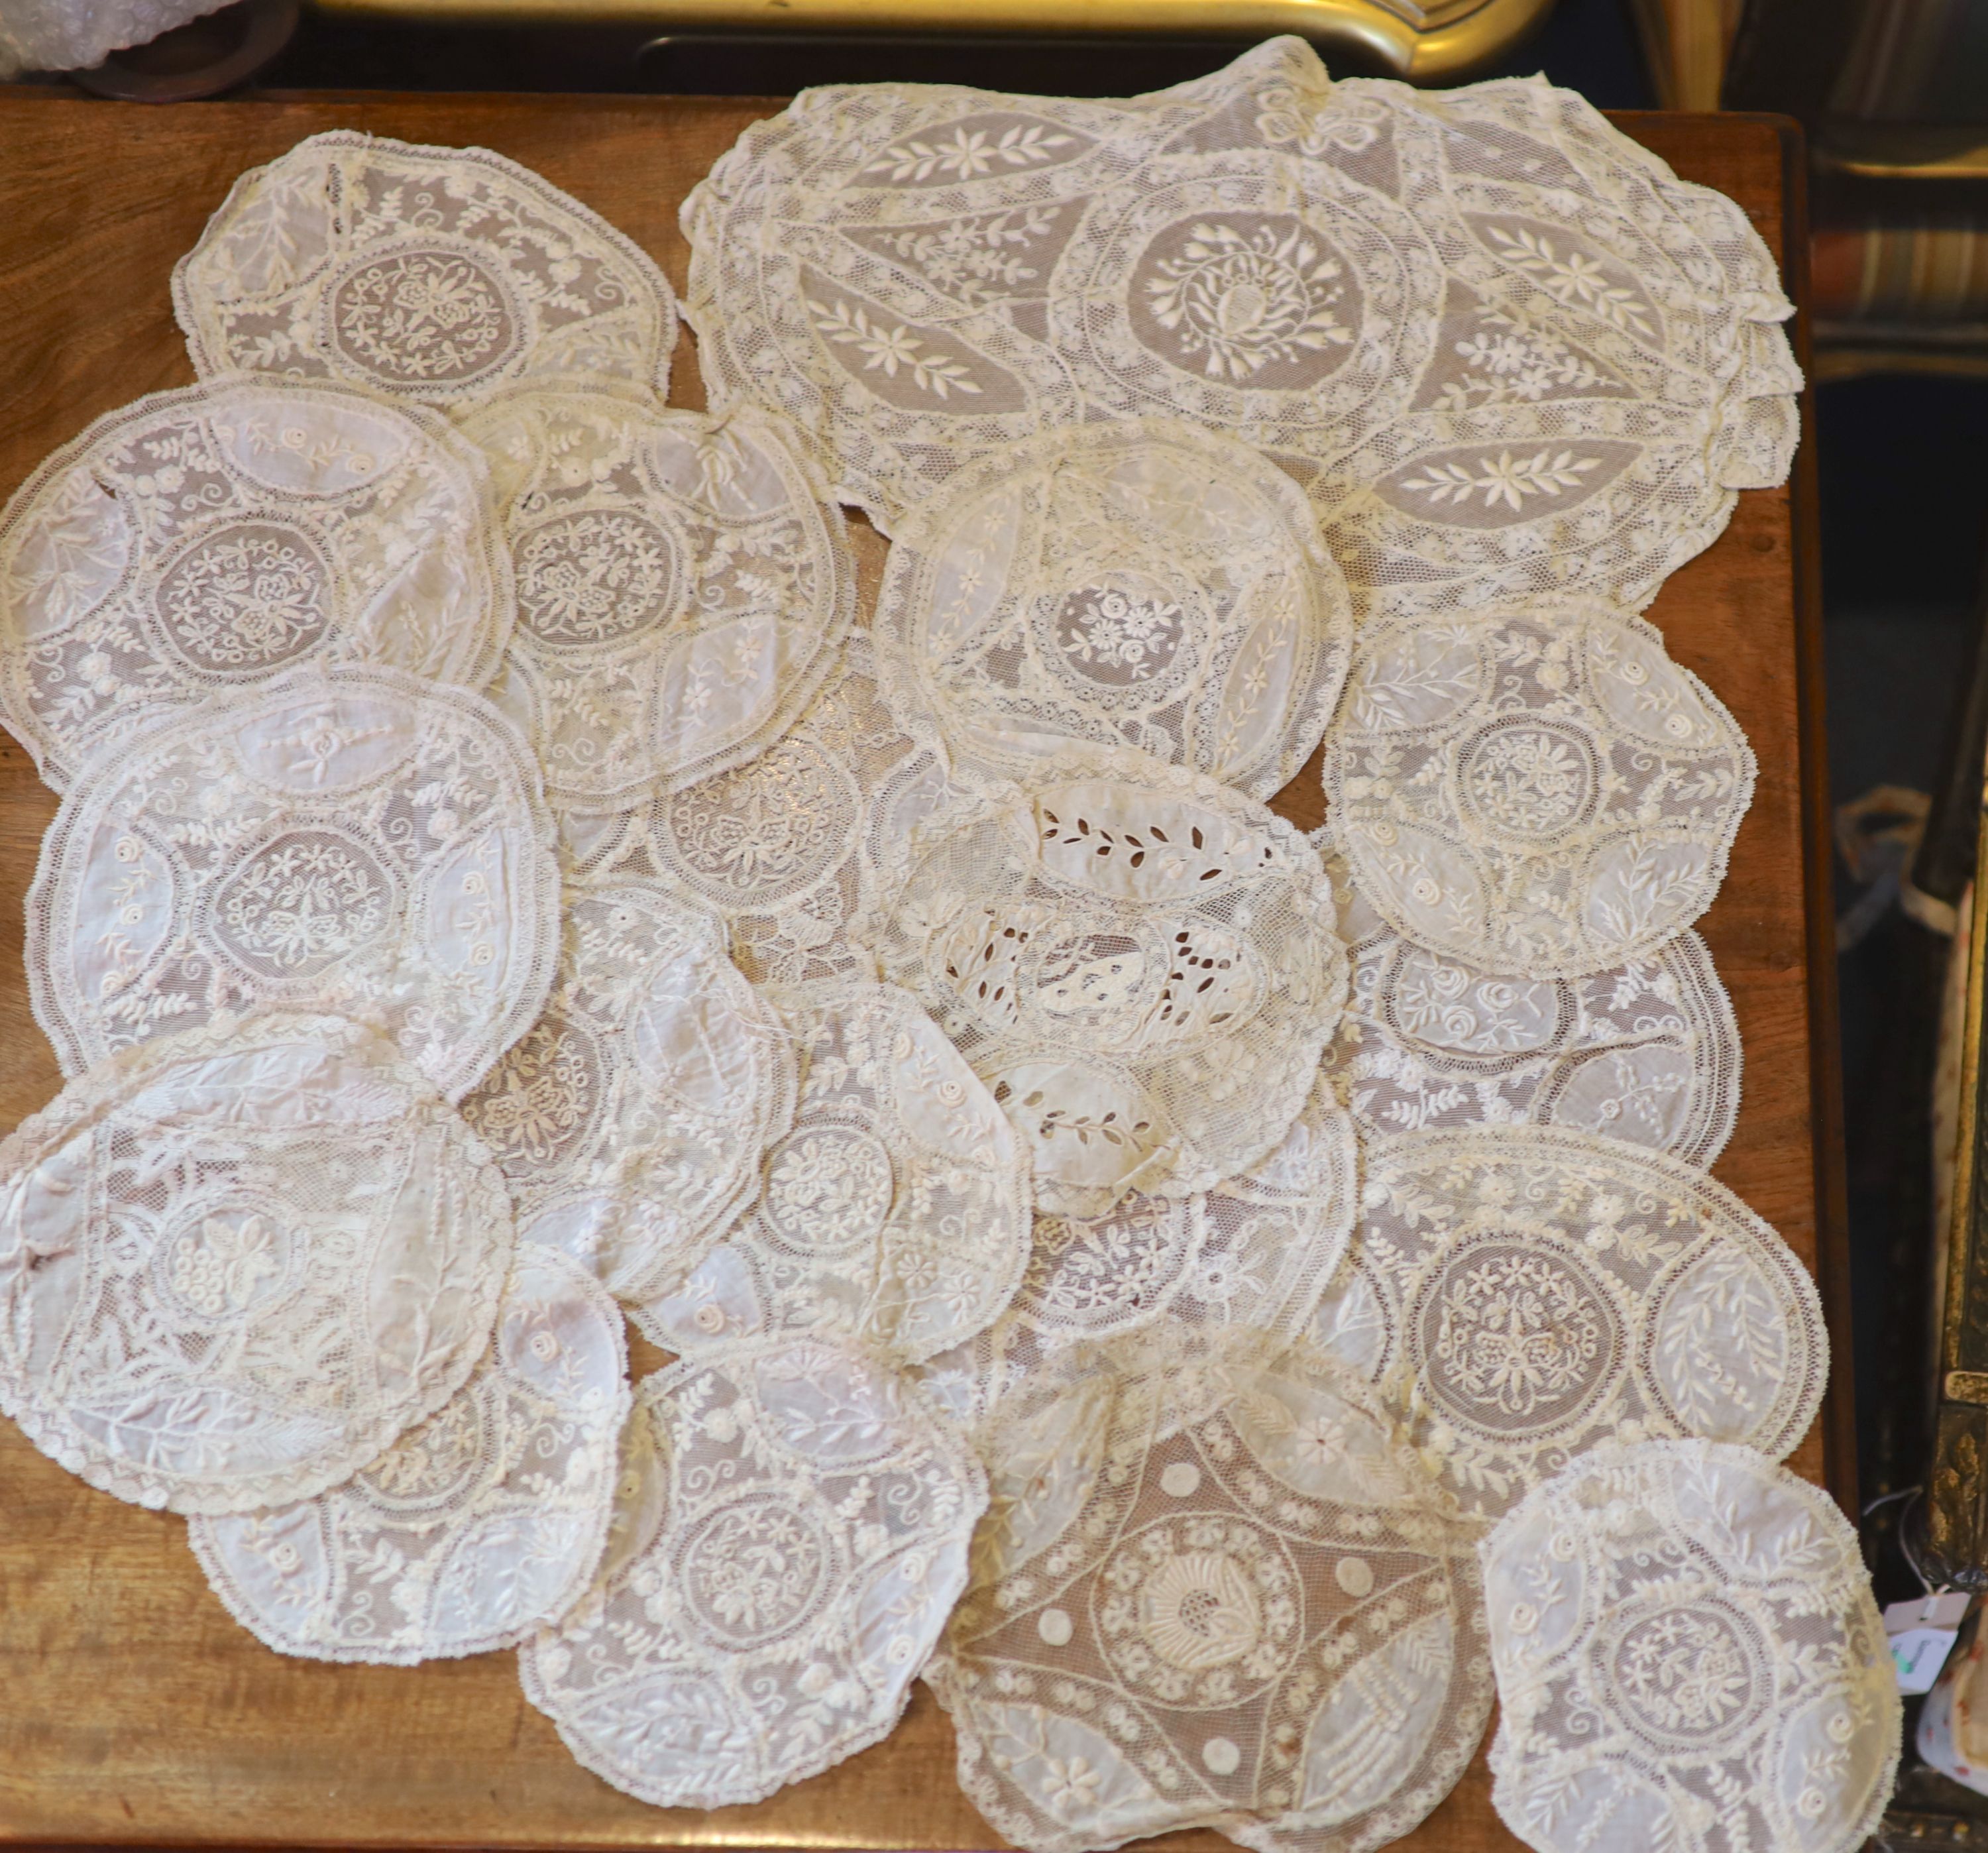 A square Normandy lace table cloth and approximately nineteen circular place mats and a centrepiece,